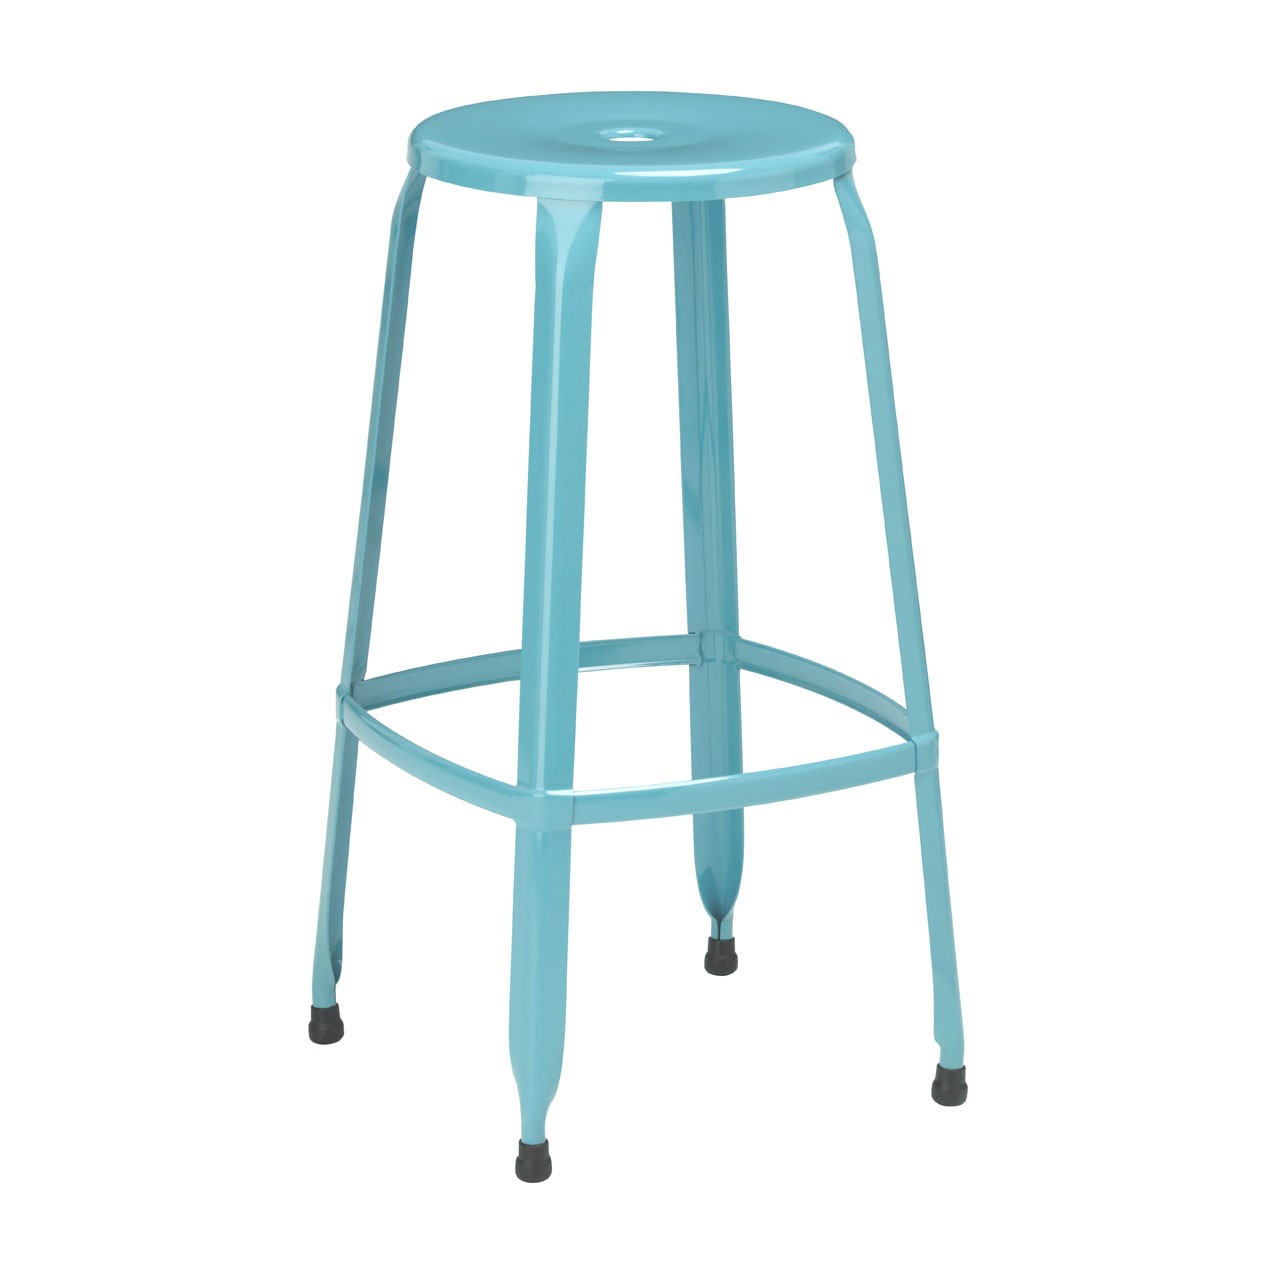 Kitchen Bar Disc Stool Powder Coated Metal For Home Office Break